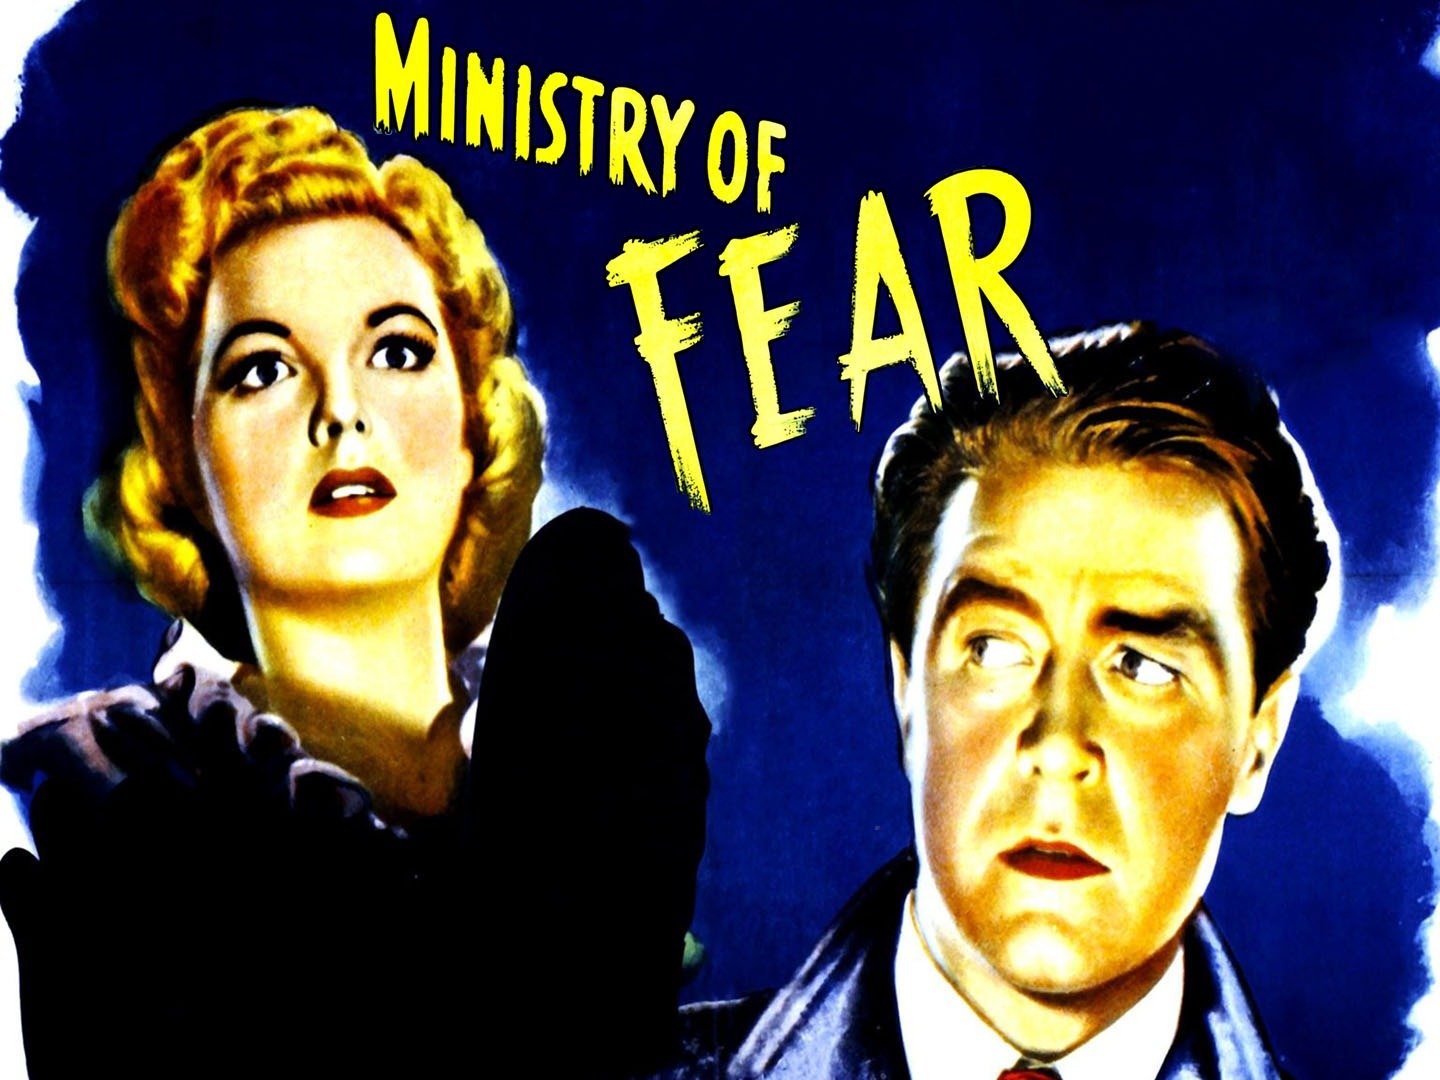 41-facts-about-the-movie-ministry-of-fear